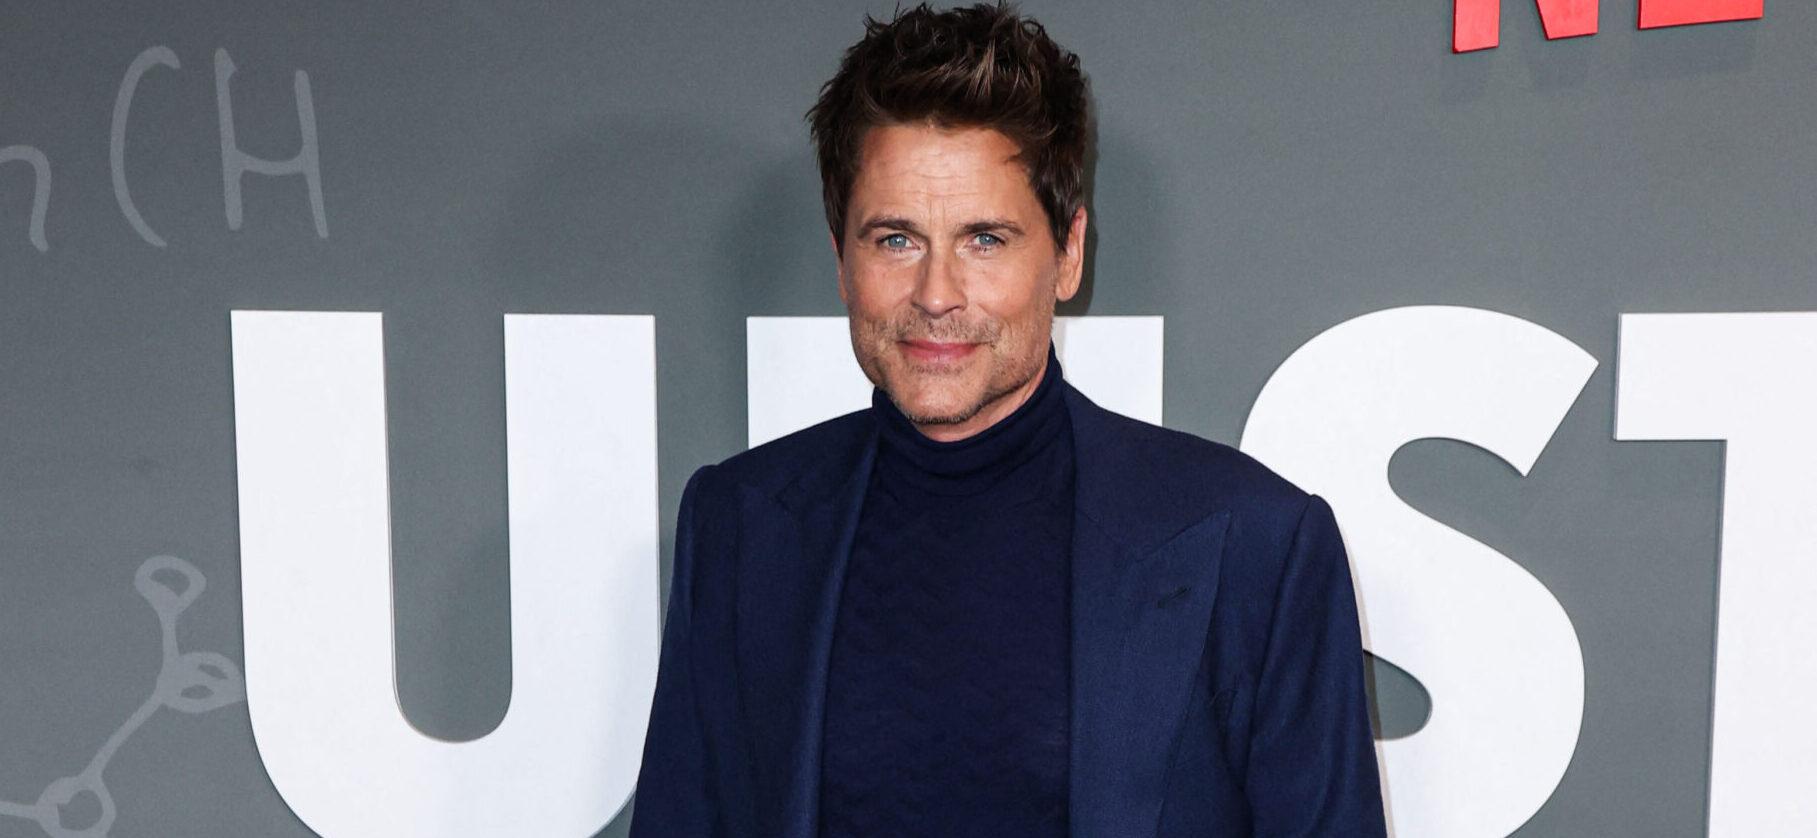 Rob Lowe Sued By Former Employee For Discrimination & Wrongful Termination